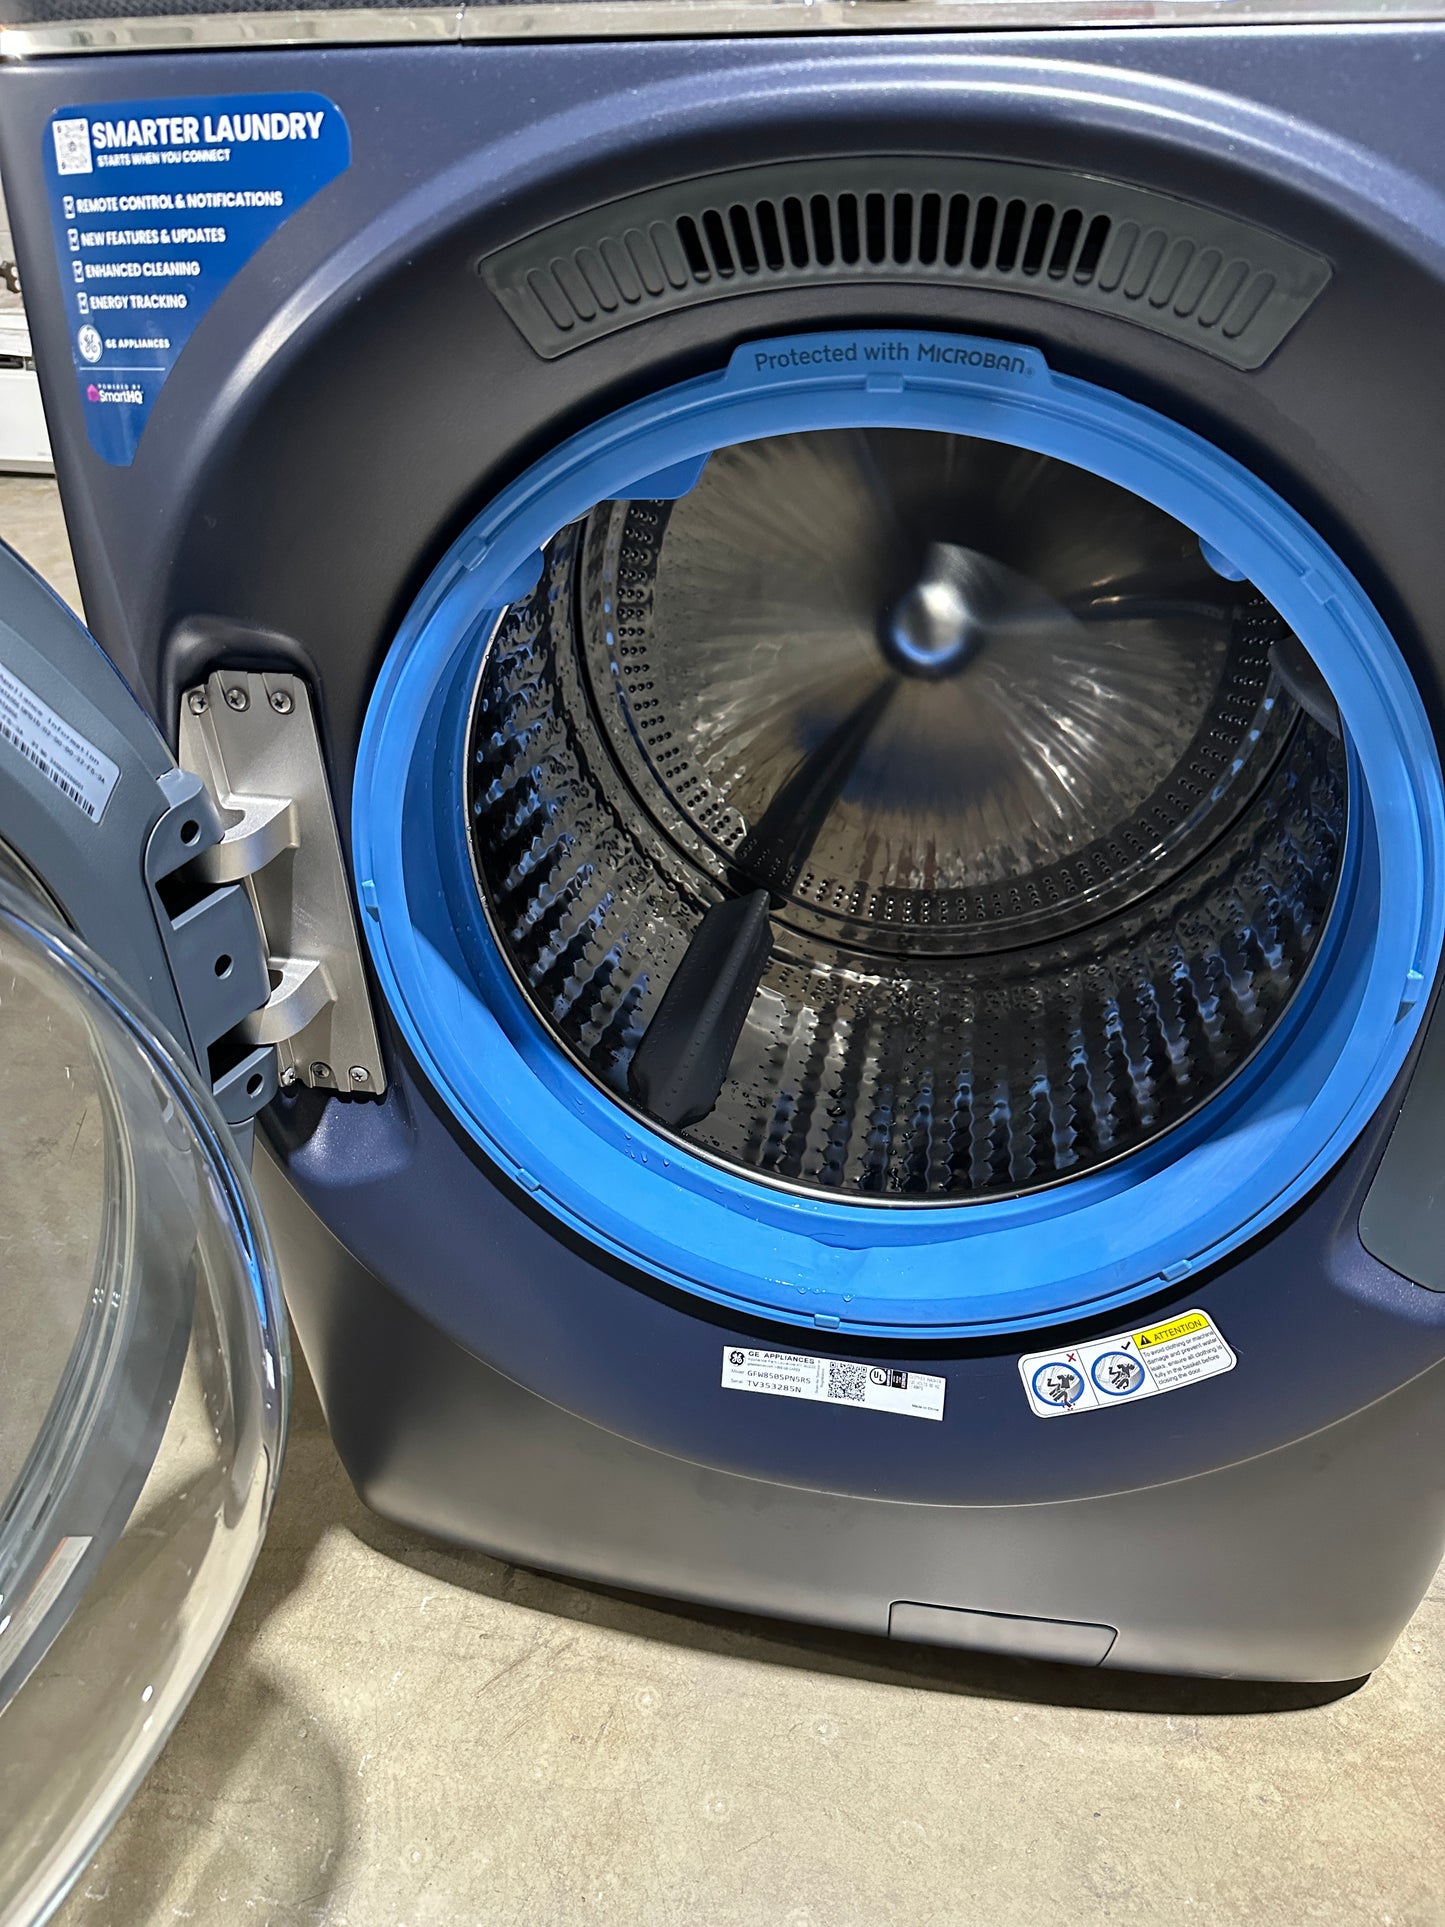 GREAT NEW GE FRONT LOAD WASHER - SAPPHIRE BLUE- MODEL: GFW850SPNRS WAS12094S